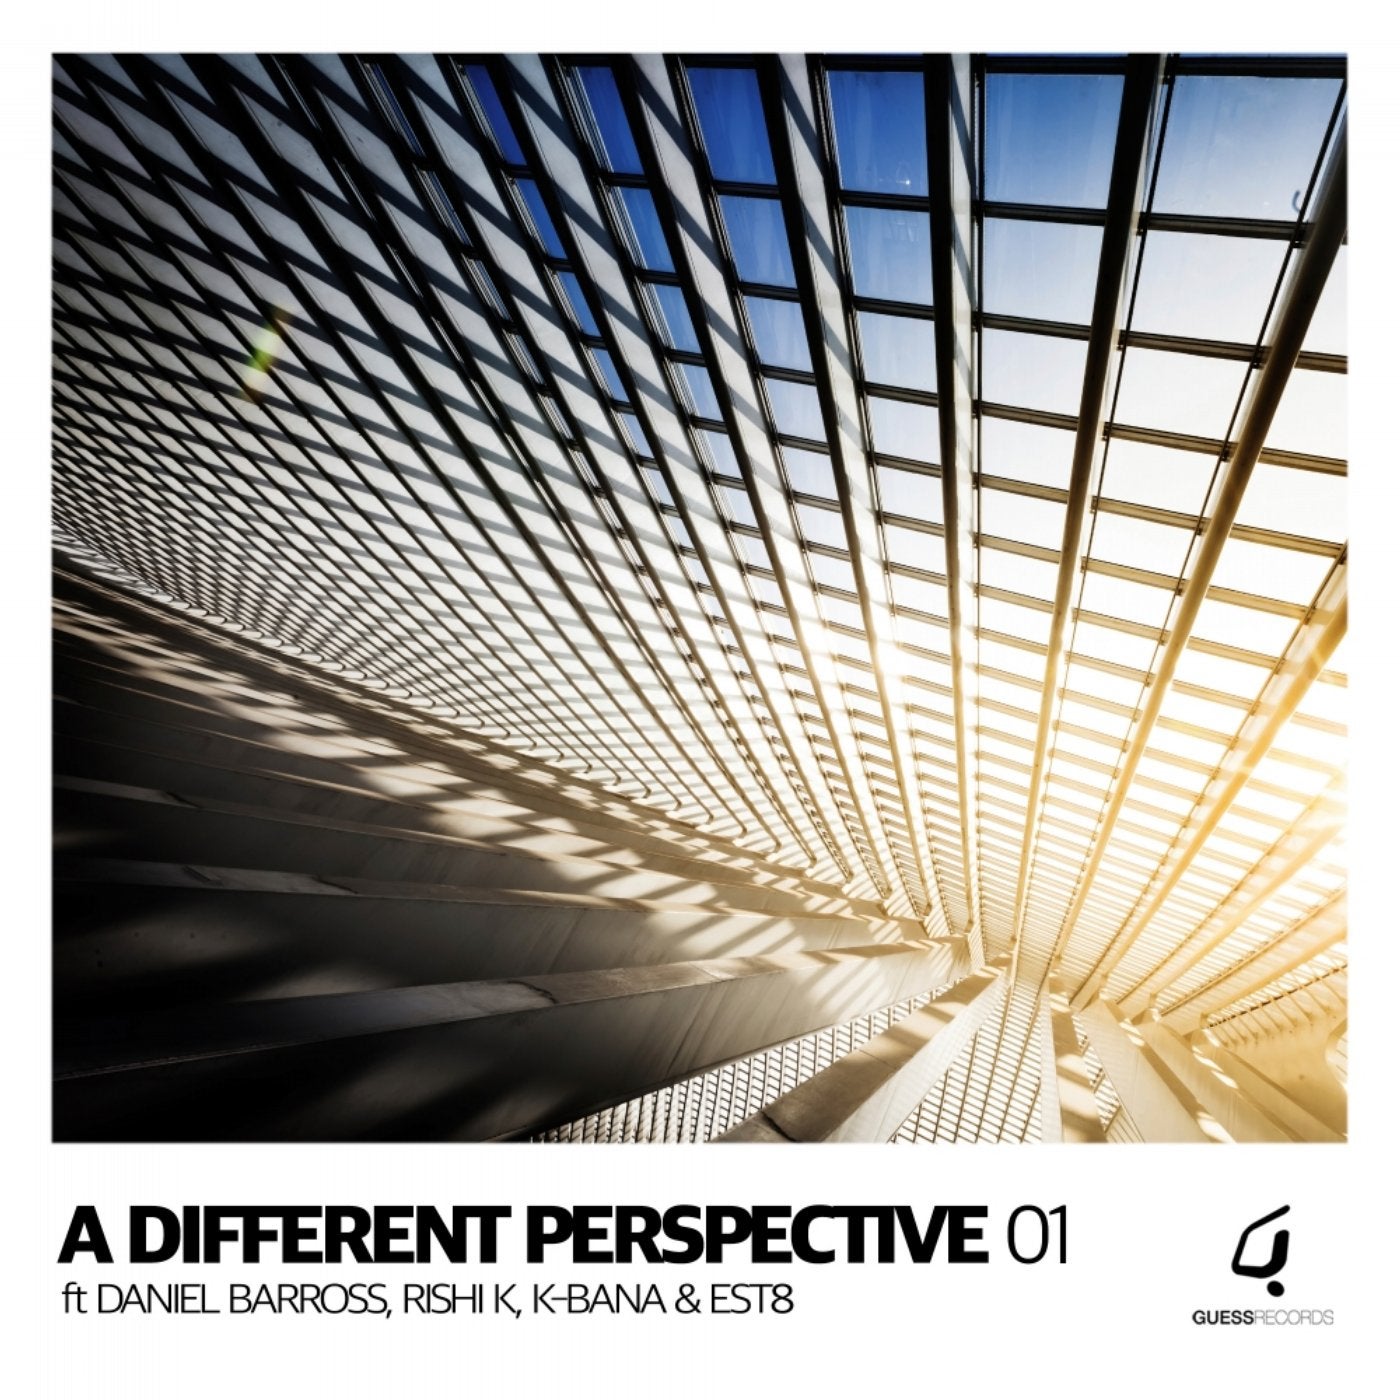 A Different Perspective 01